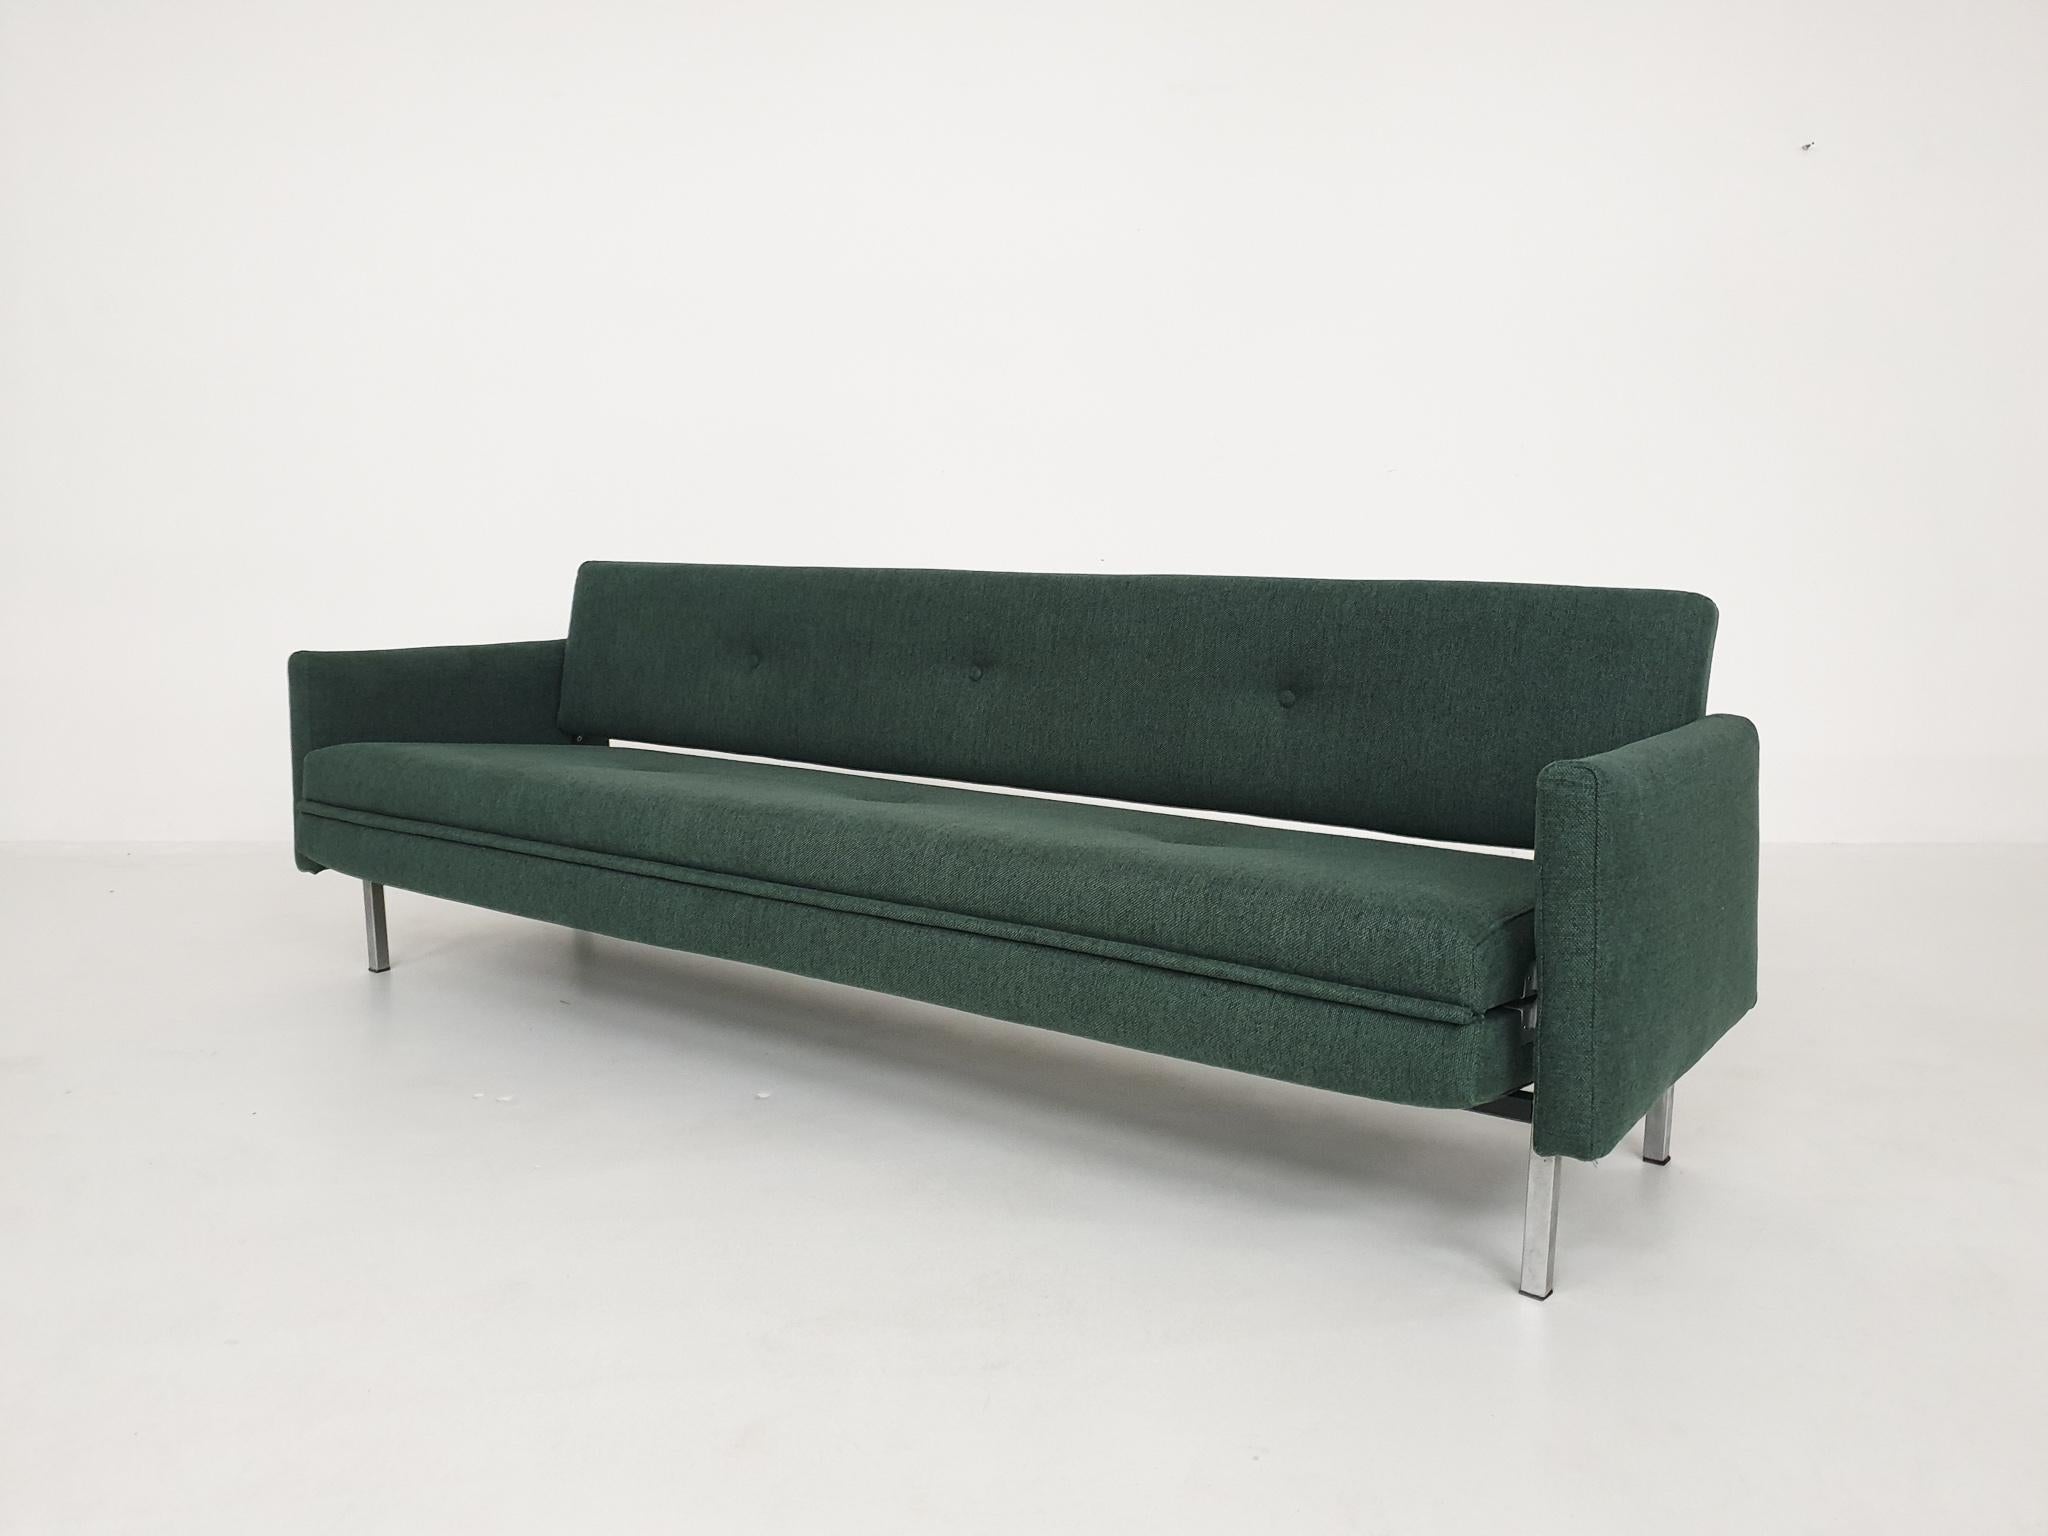 This sofa is model BR 49, often refered to as Model BR39/49, a design by Martin Visser for 't Spectrum the Netherlands. This sofa one of the most rare and sought after daybeds of the Dutch midcentury. 

In contradiction to the other sofa daybed by